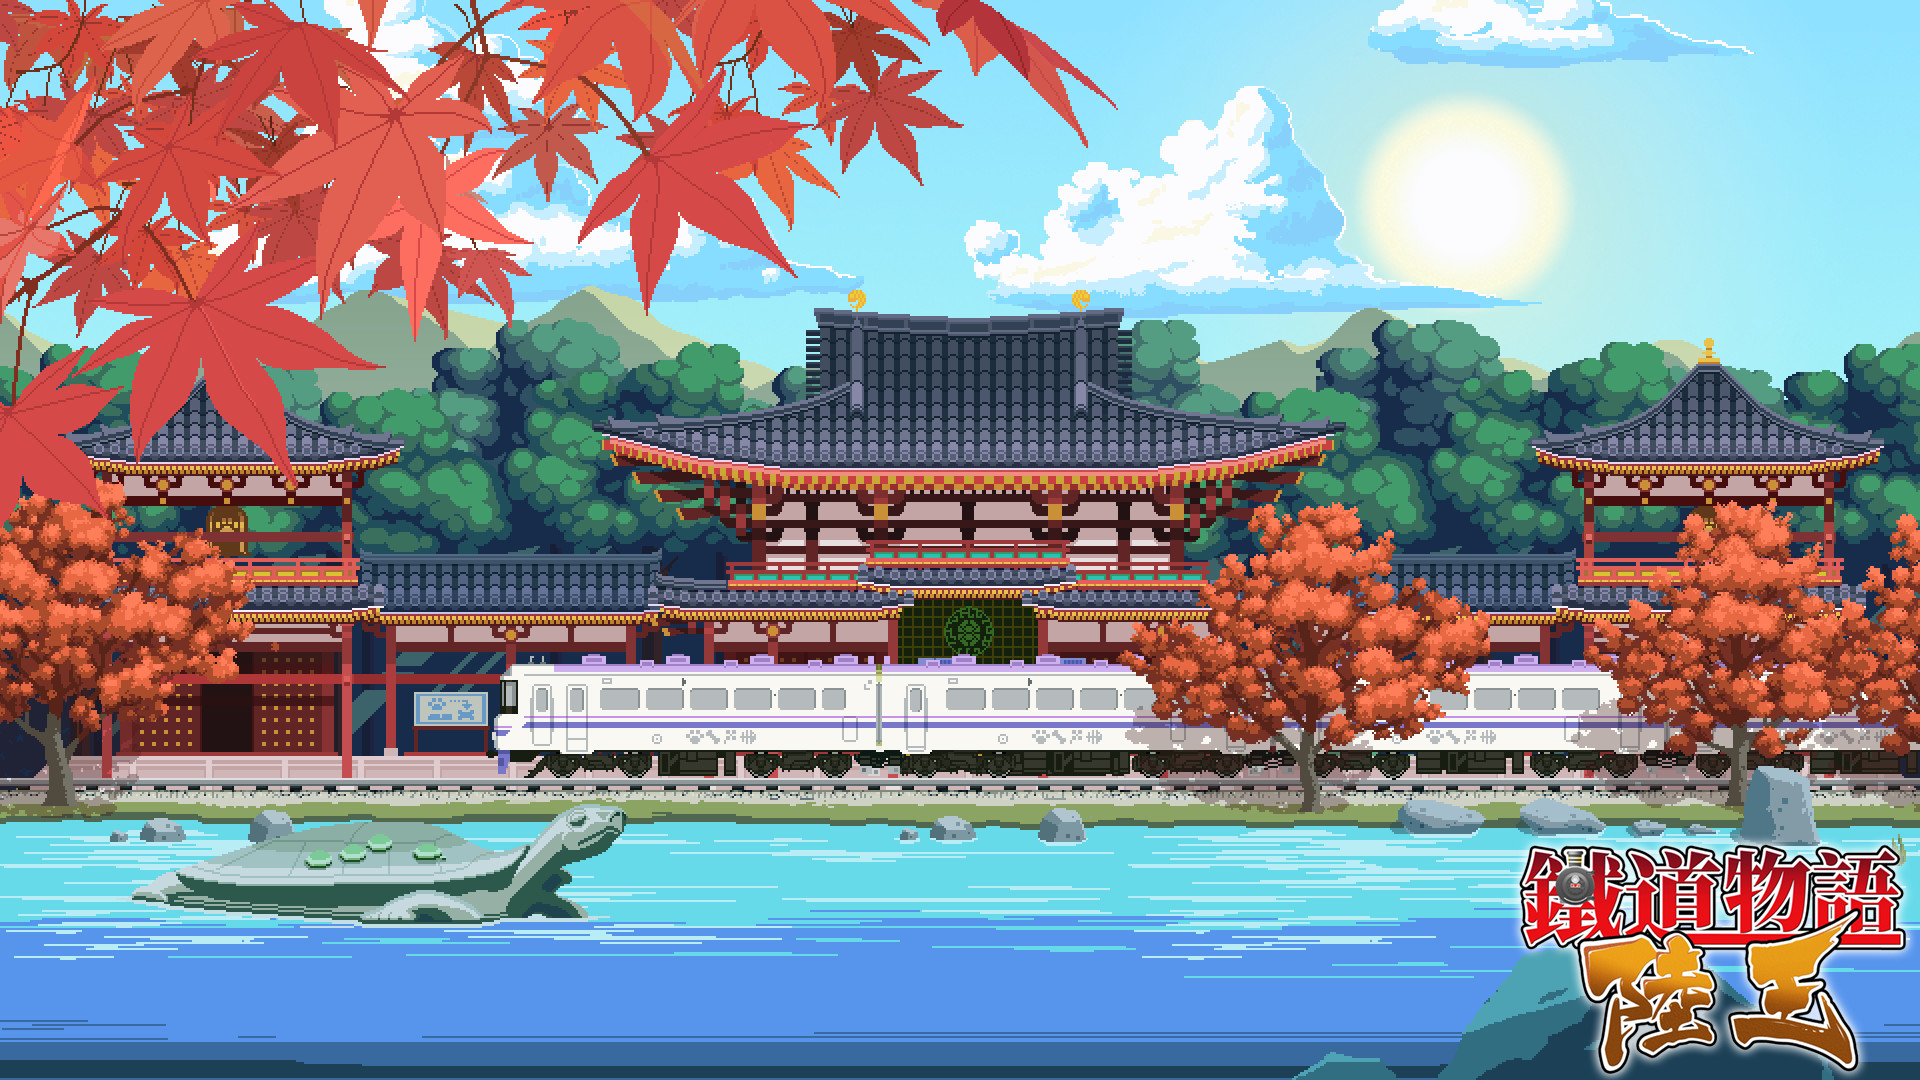 Find the best laptops for 铁道物语：陆王（Railway Saga:Land King）